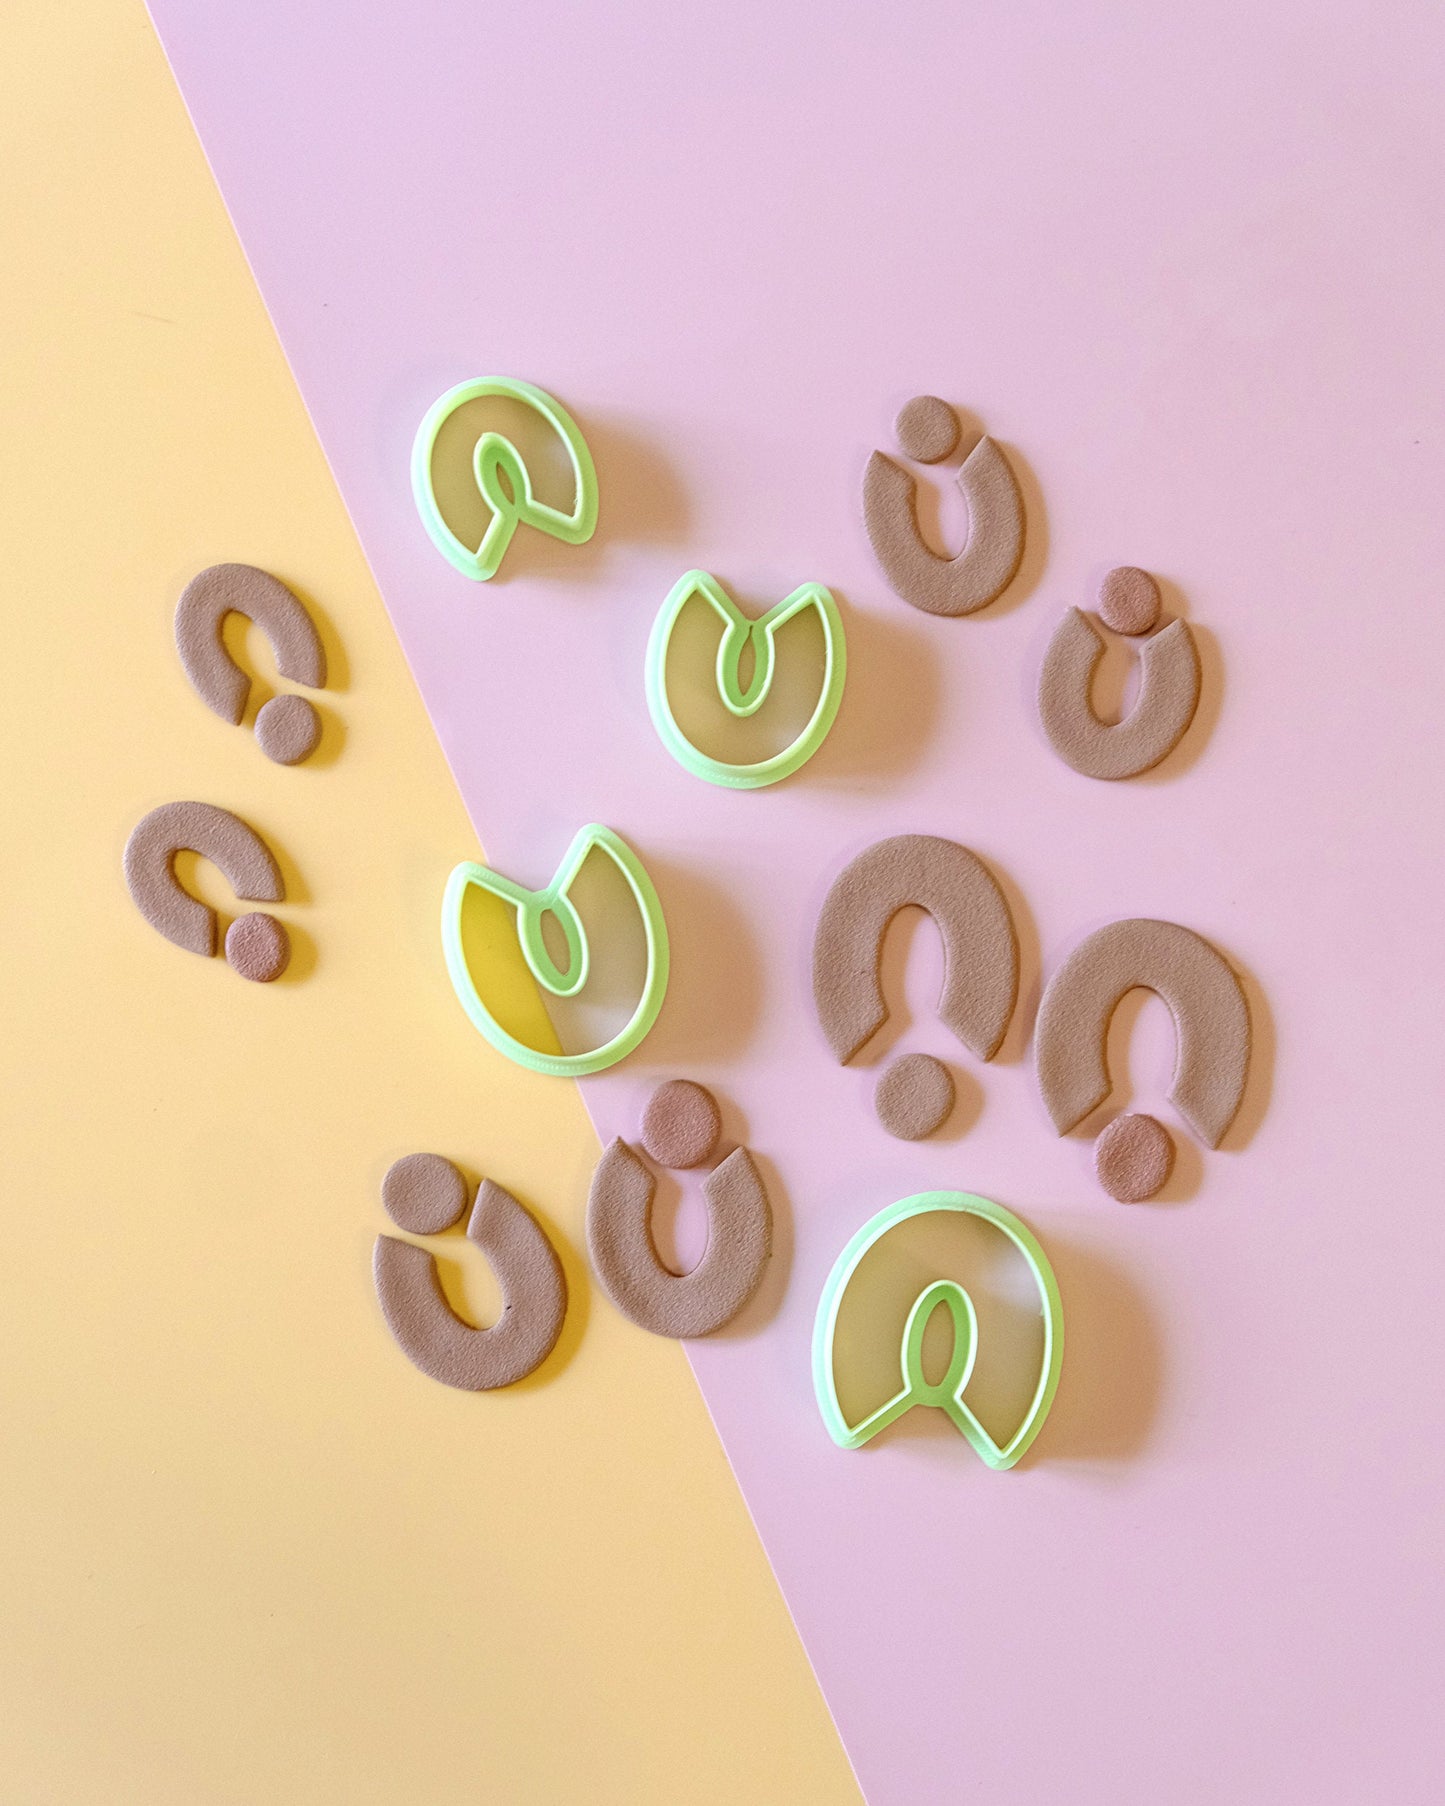 Oval Hoop Polymer Clay Cutters